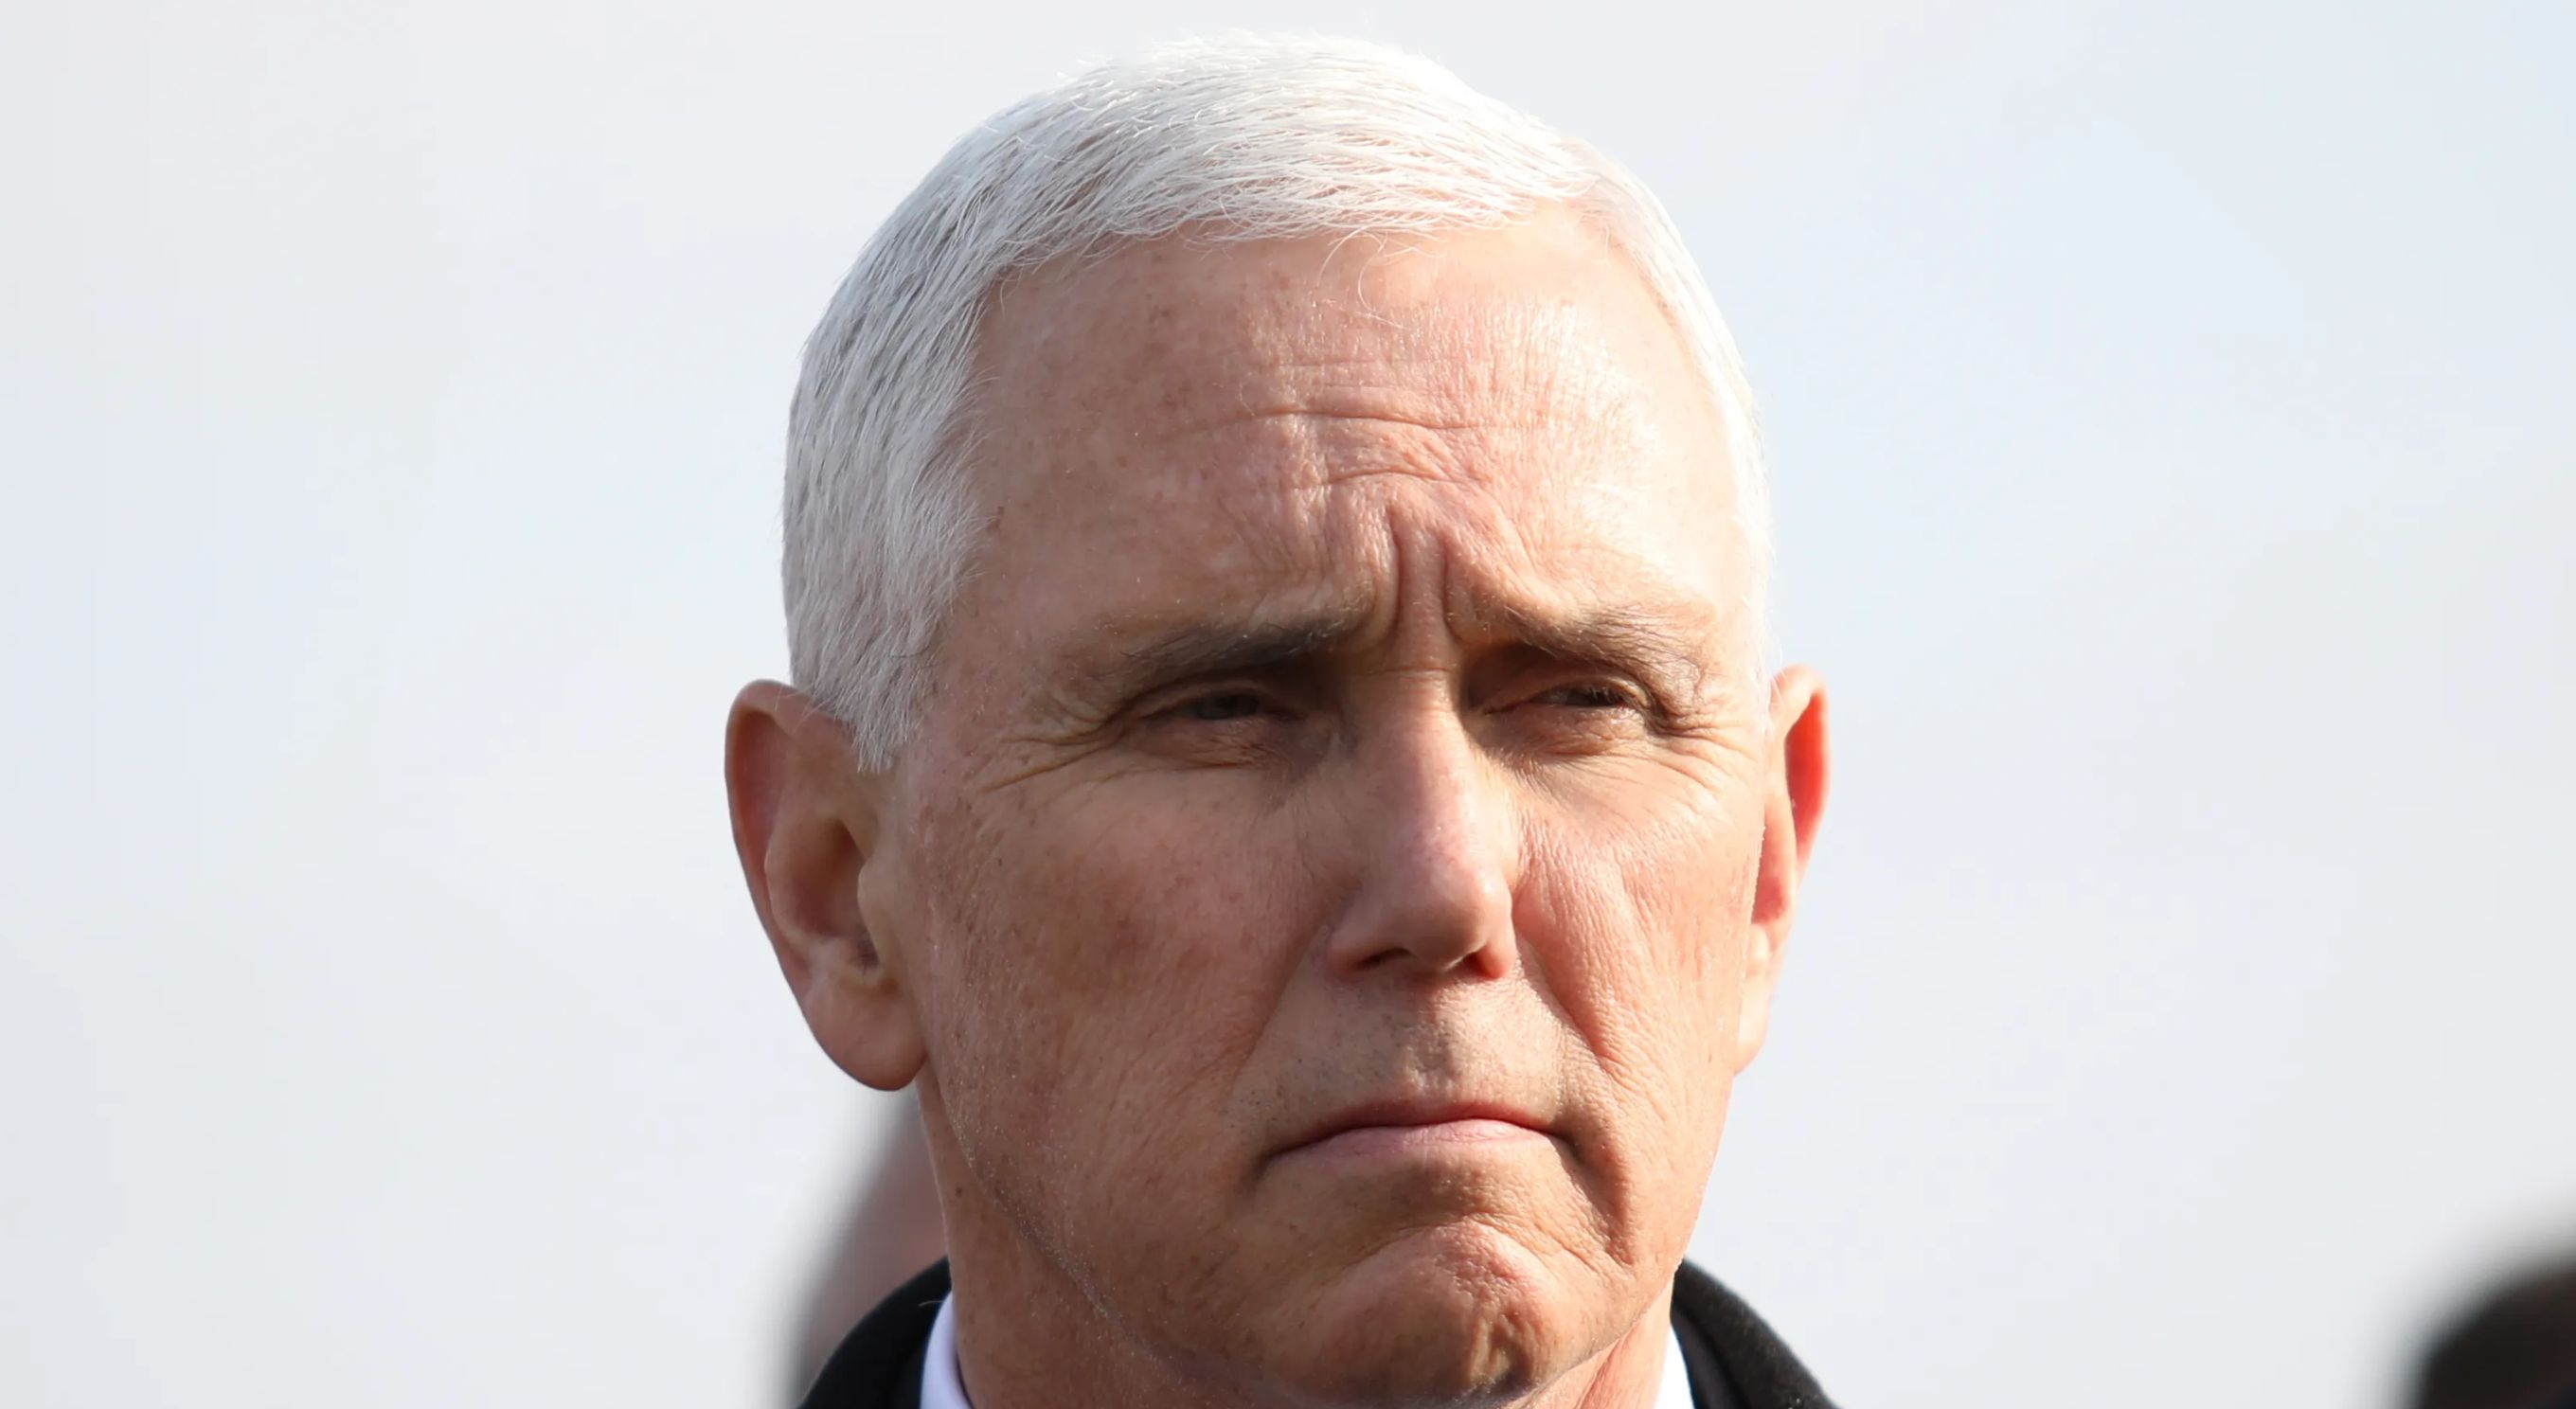 Former Vice President Mike Pence looks on.